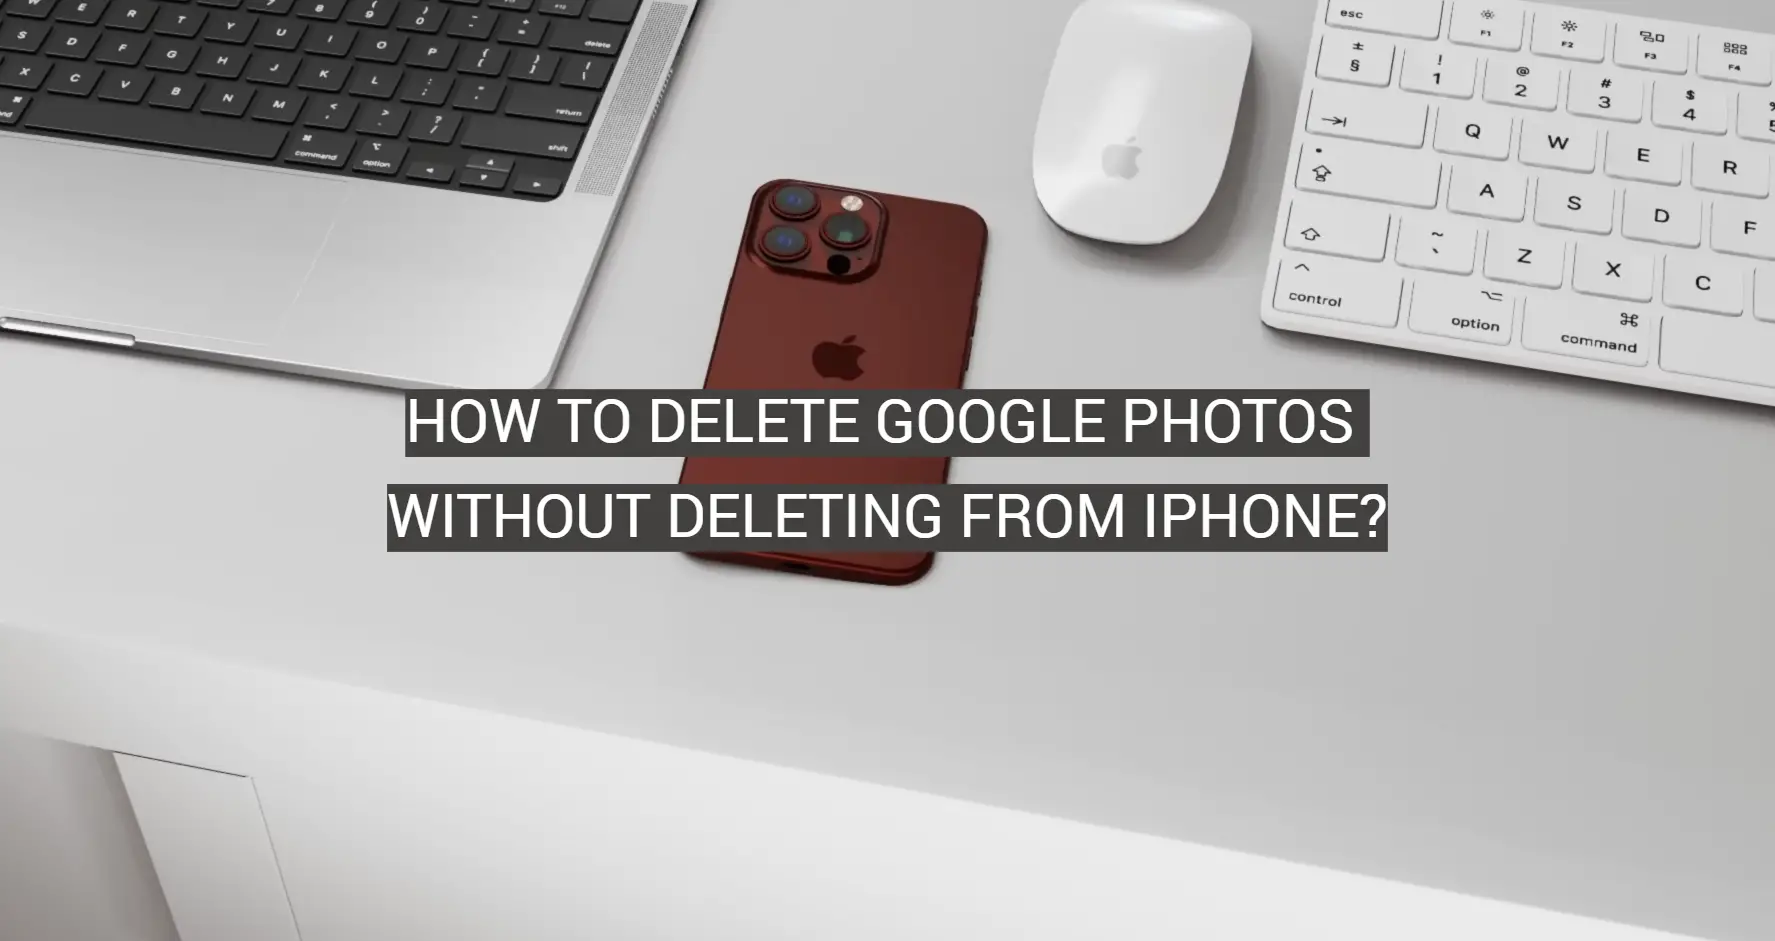 How to Delete Google Photos Without Deleting From iPhone?